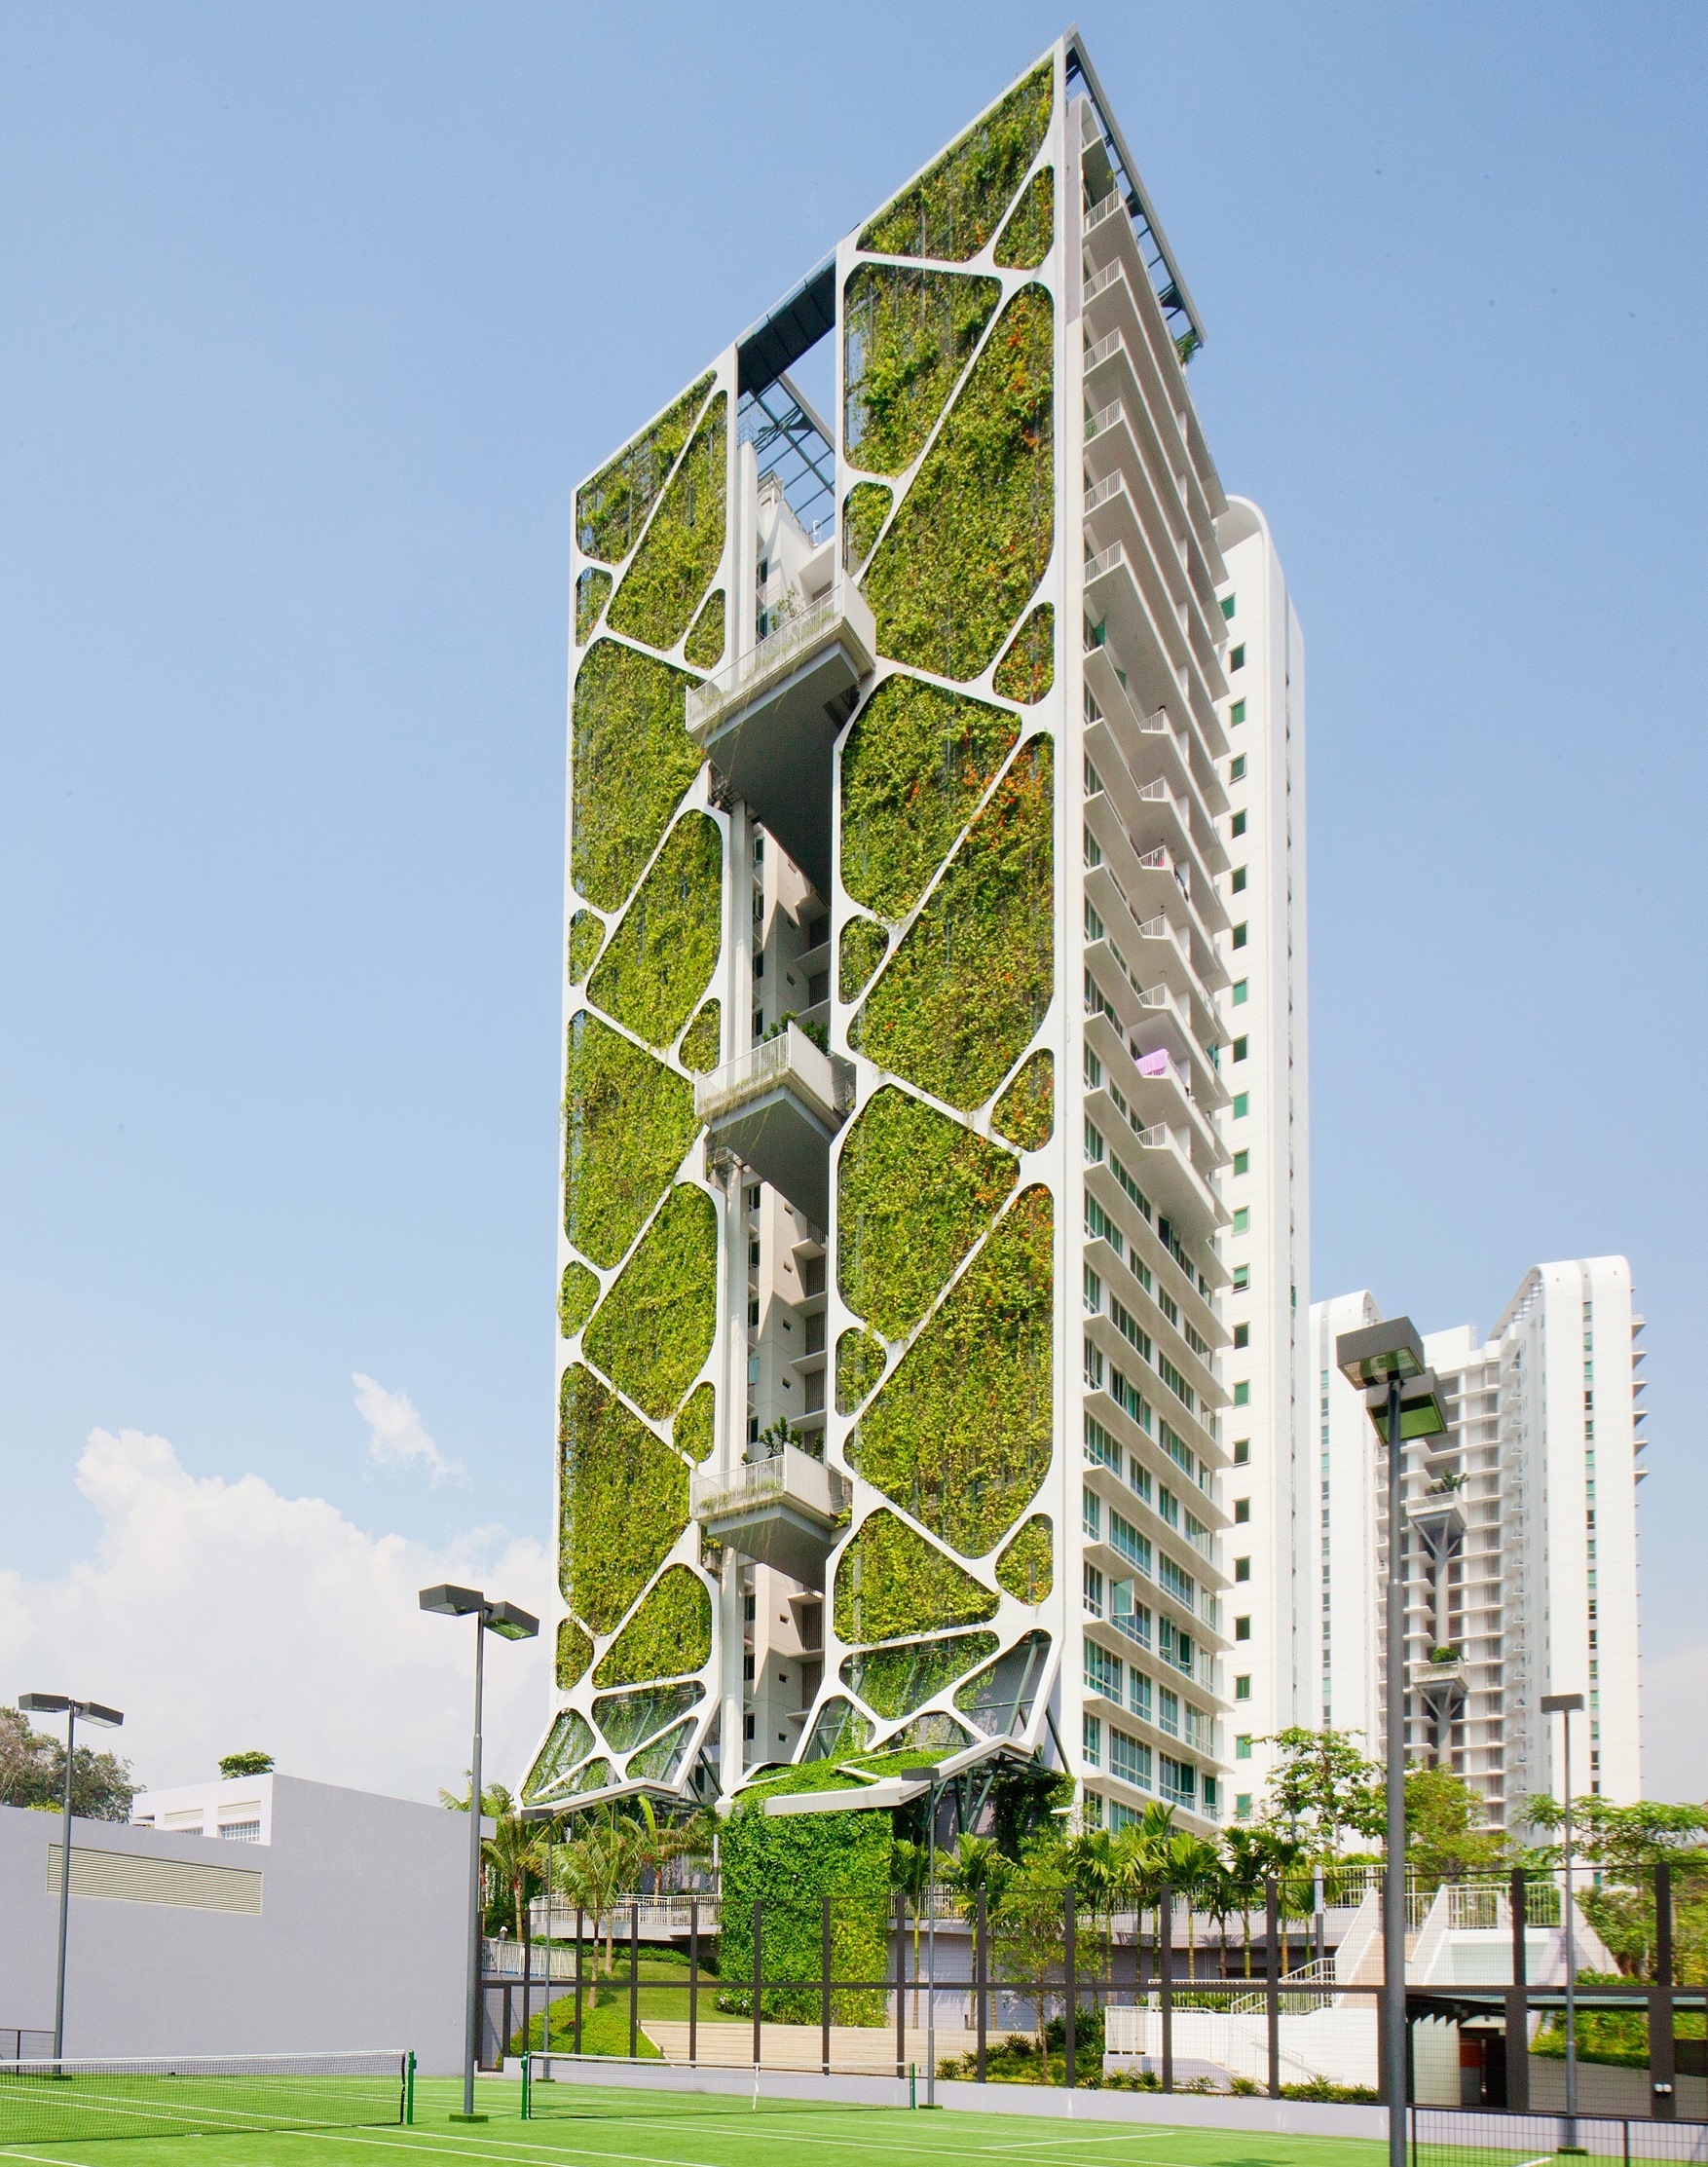 2023/06/CDLs-Tree-House-has-entered-Guinness-World-Records-for-the-largest-vertical-garden.jpg